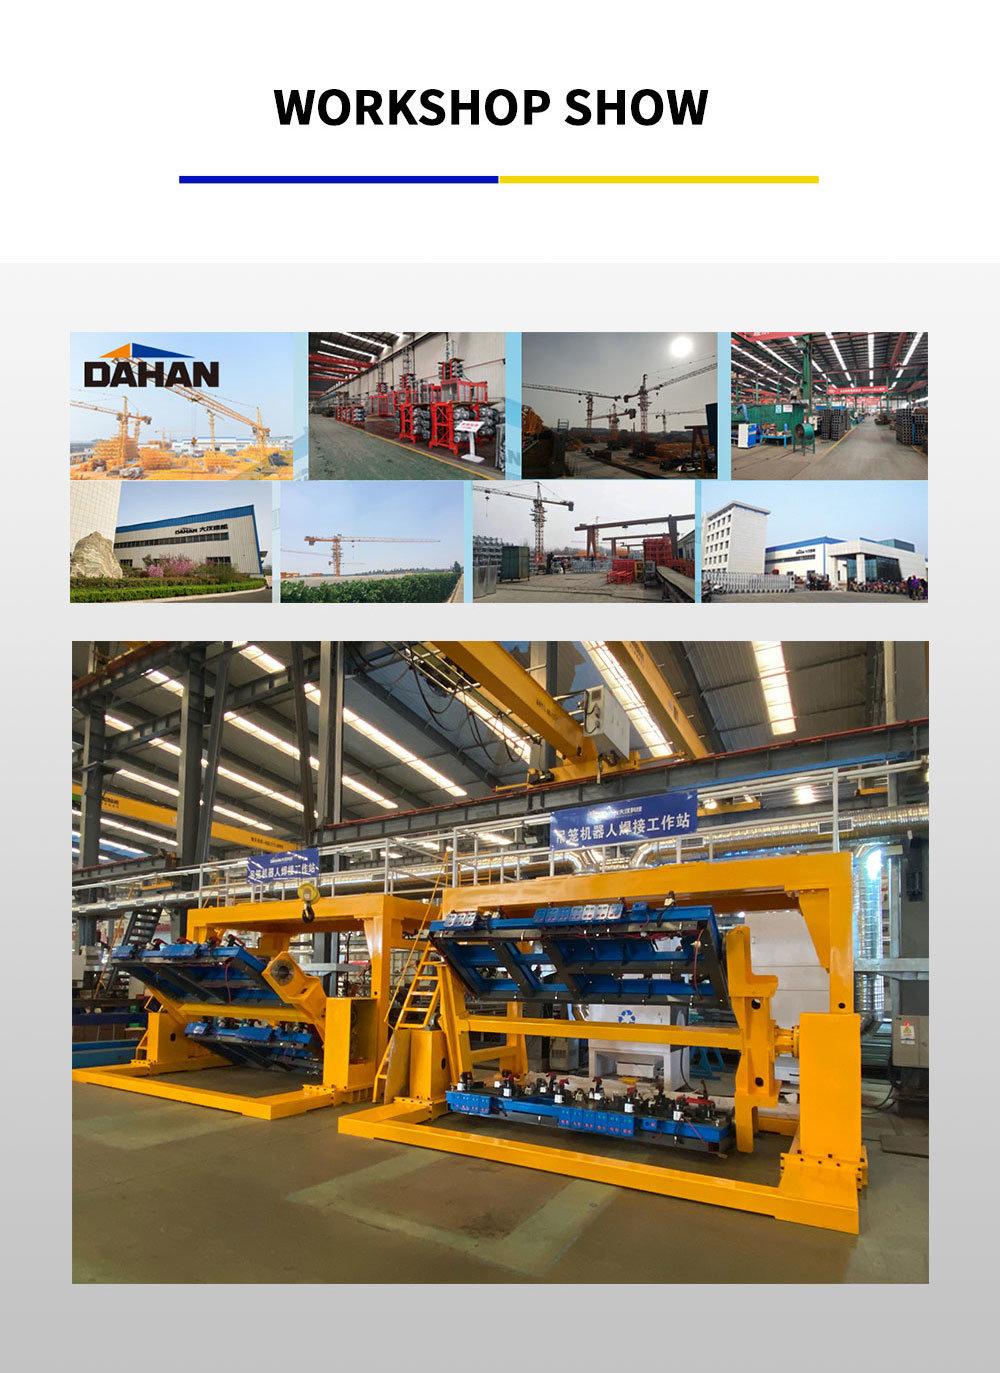 Chinese-Made Dahan Building Construction Tower Cap Tower Crane Construction Equipment